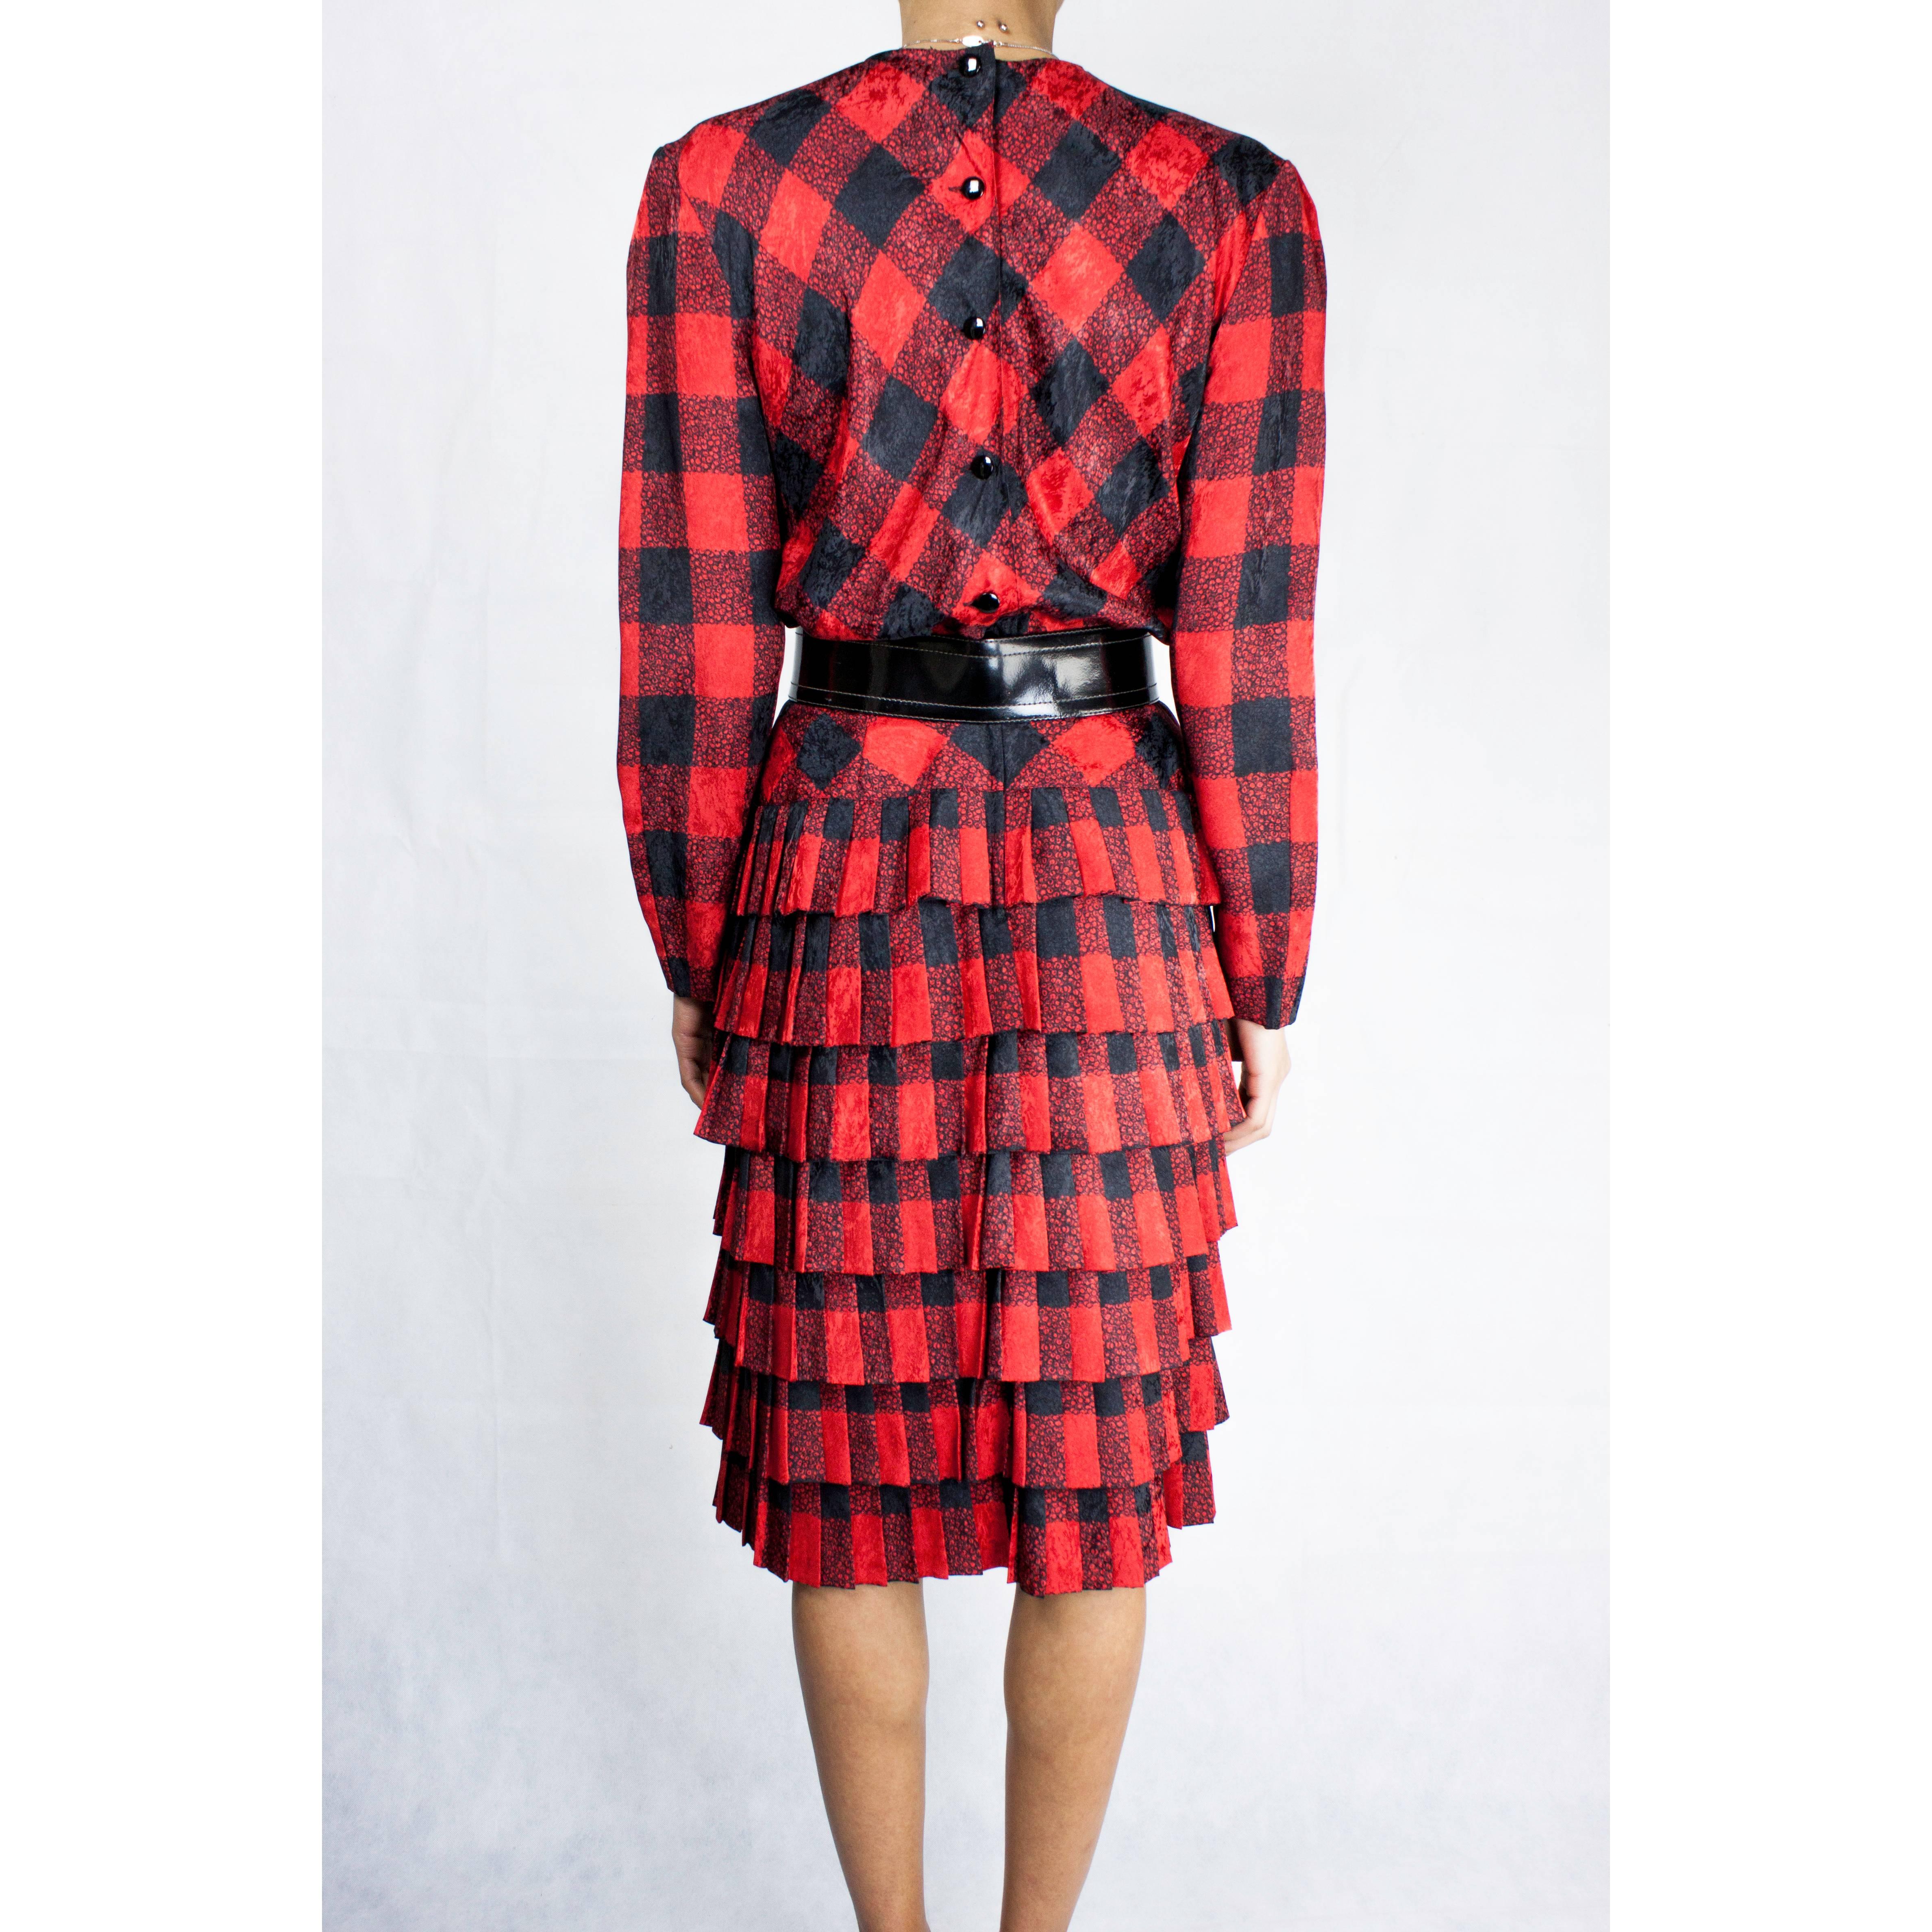 Louis Feraud red and tartan moiré evening dress, Circa 1980 In Excellent Condition For Sale In London, GB